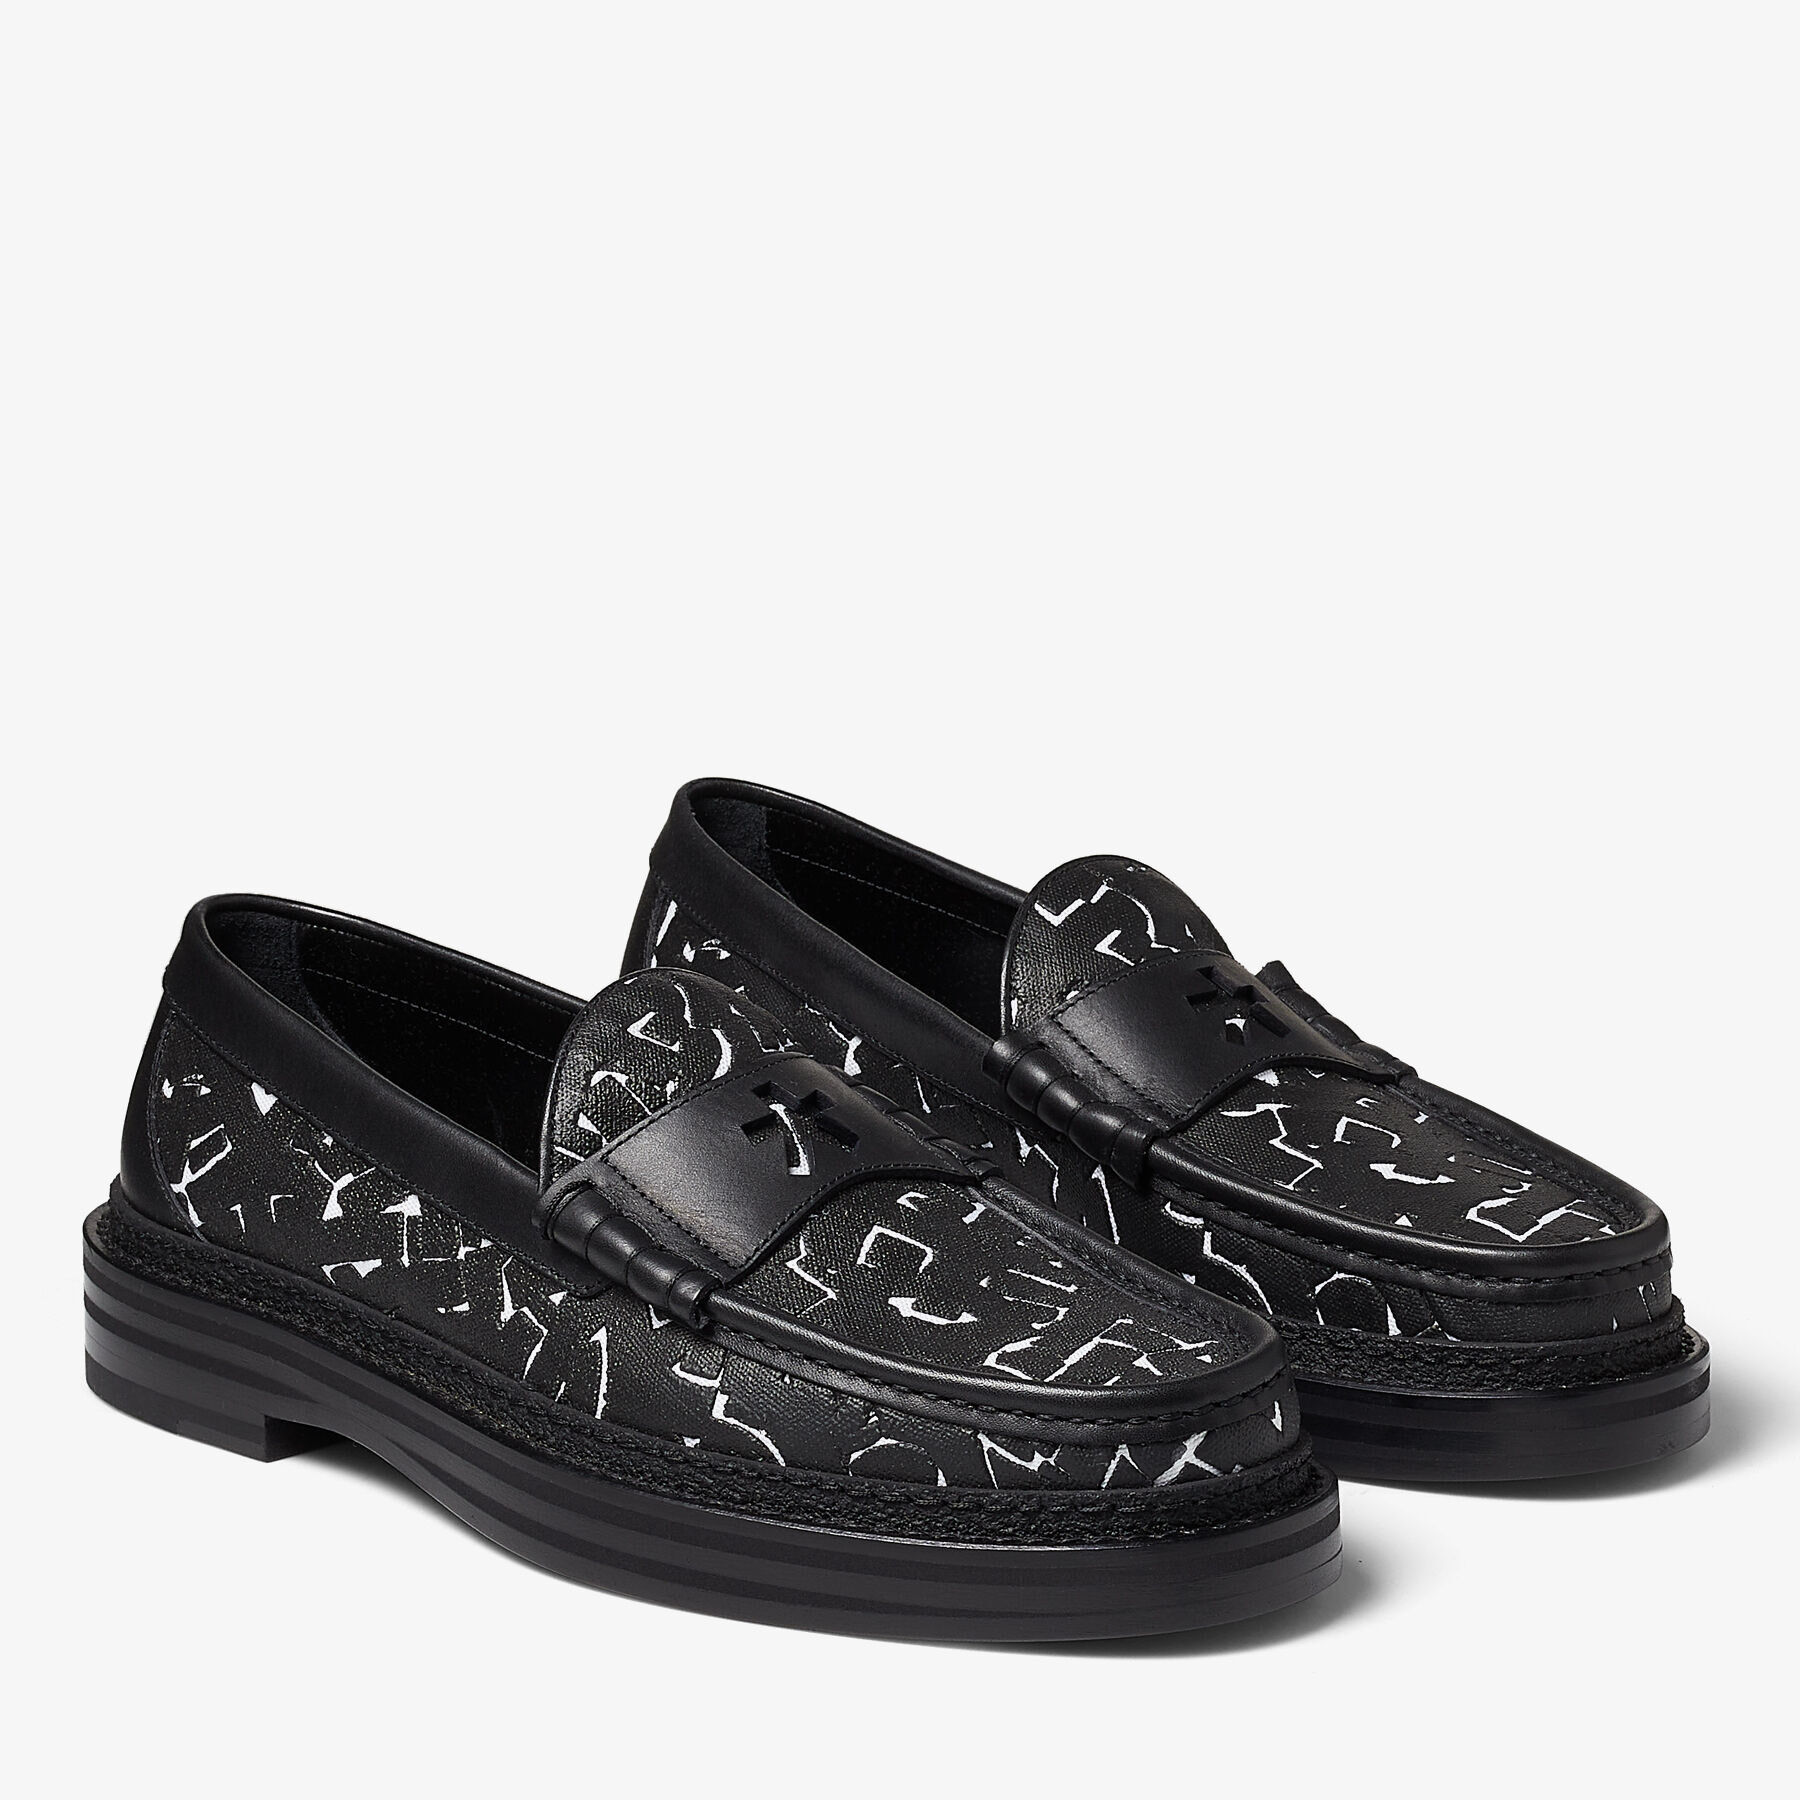 Black and White Artwork Printed Canvas Loafers | EZRA/M | JIMMY 